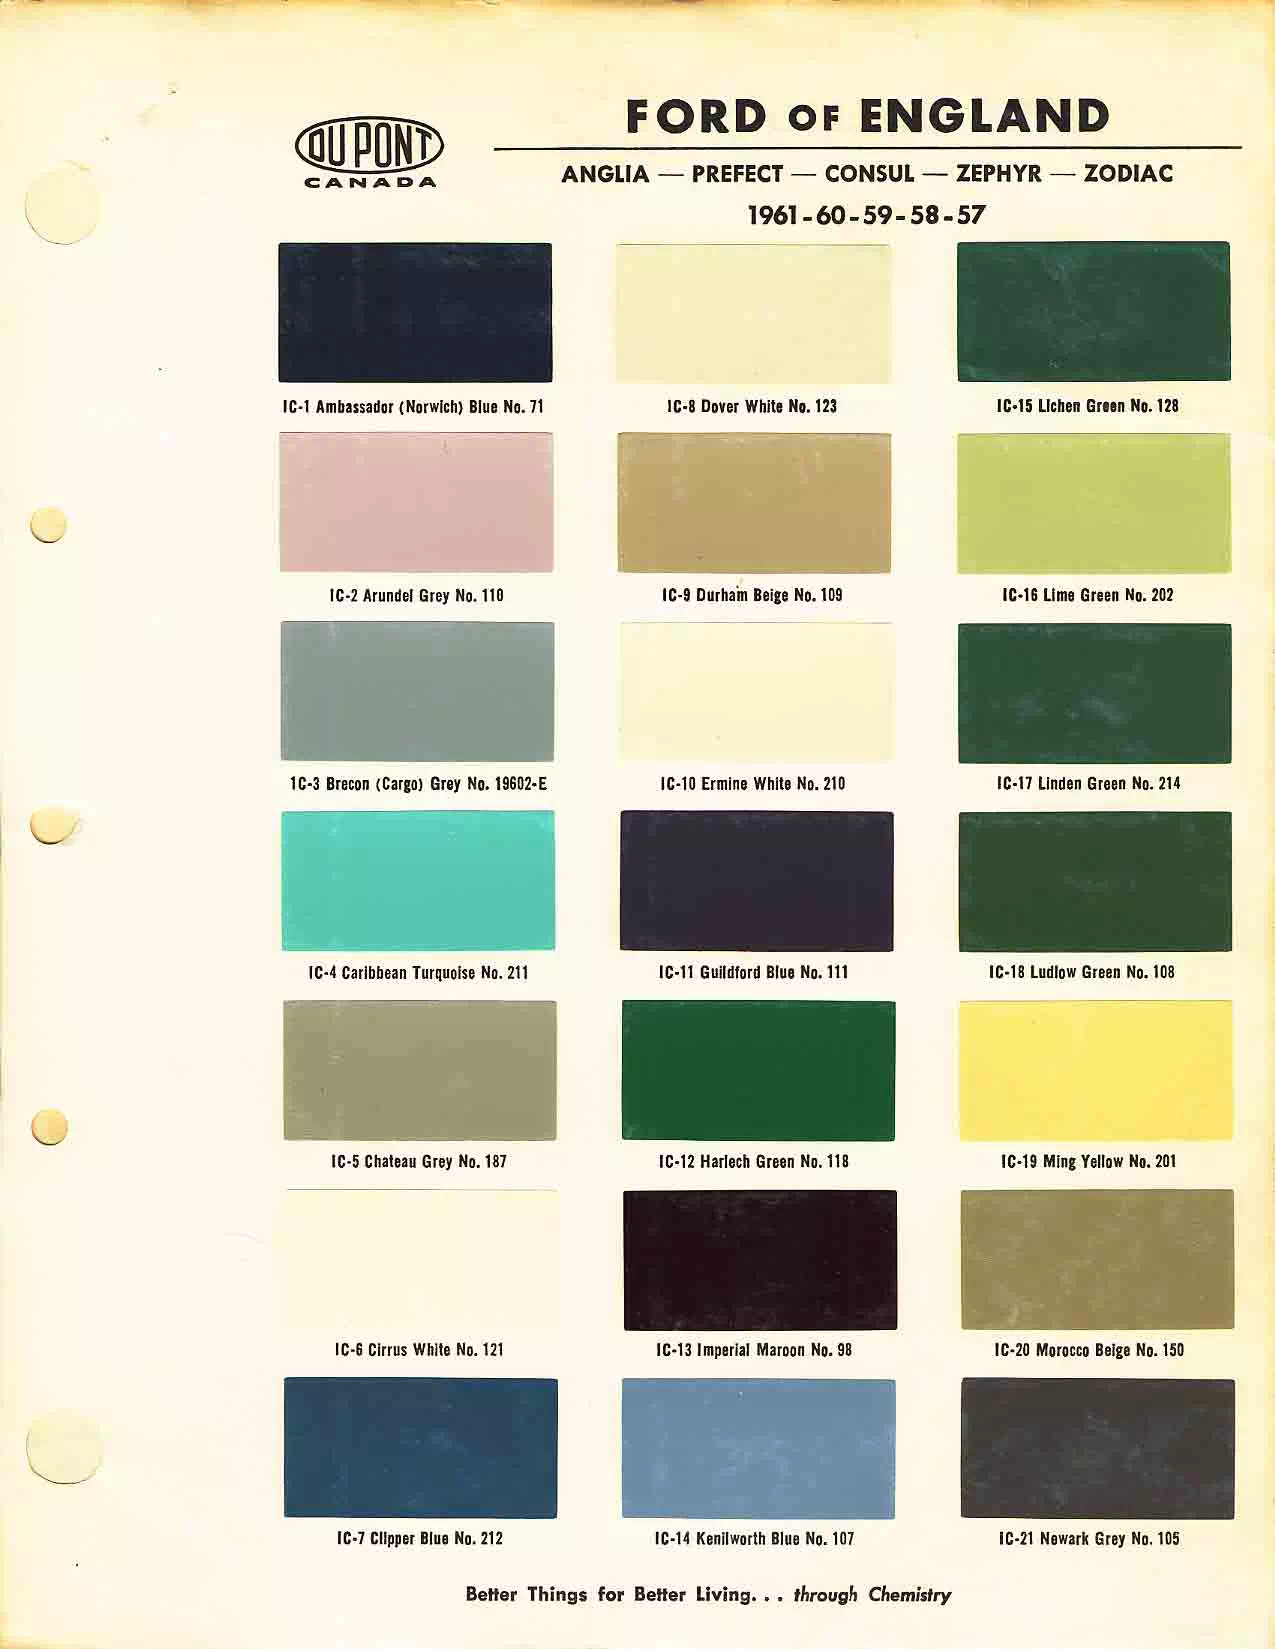 exterior colors, their codes, and example swatches used on the exterior of the vehicles in 1957